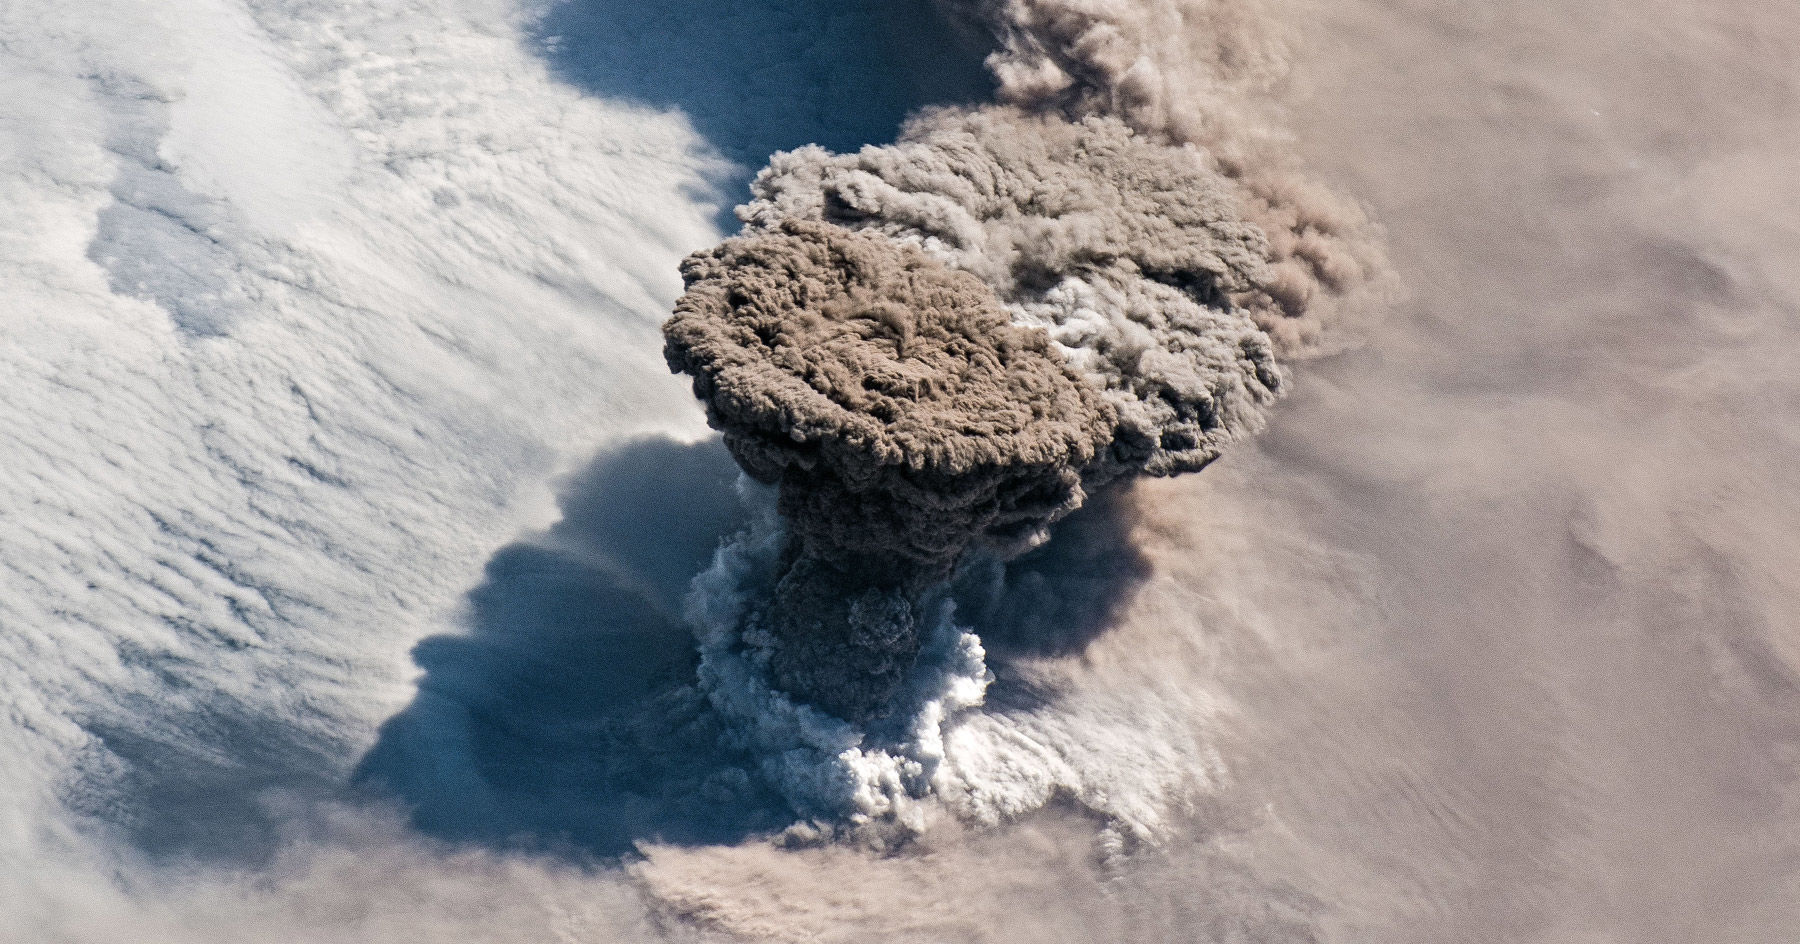 An internation Space Station astronaut-eye-view of the eruption of the Raikoke volcano on June 22, 2019. Credit: NASA